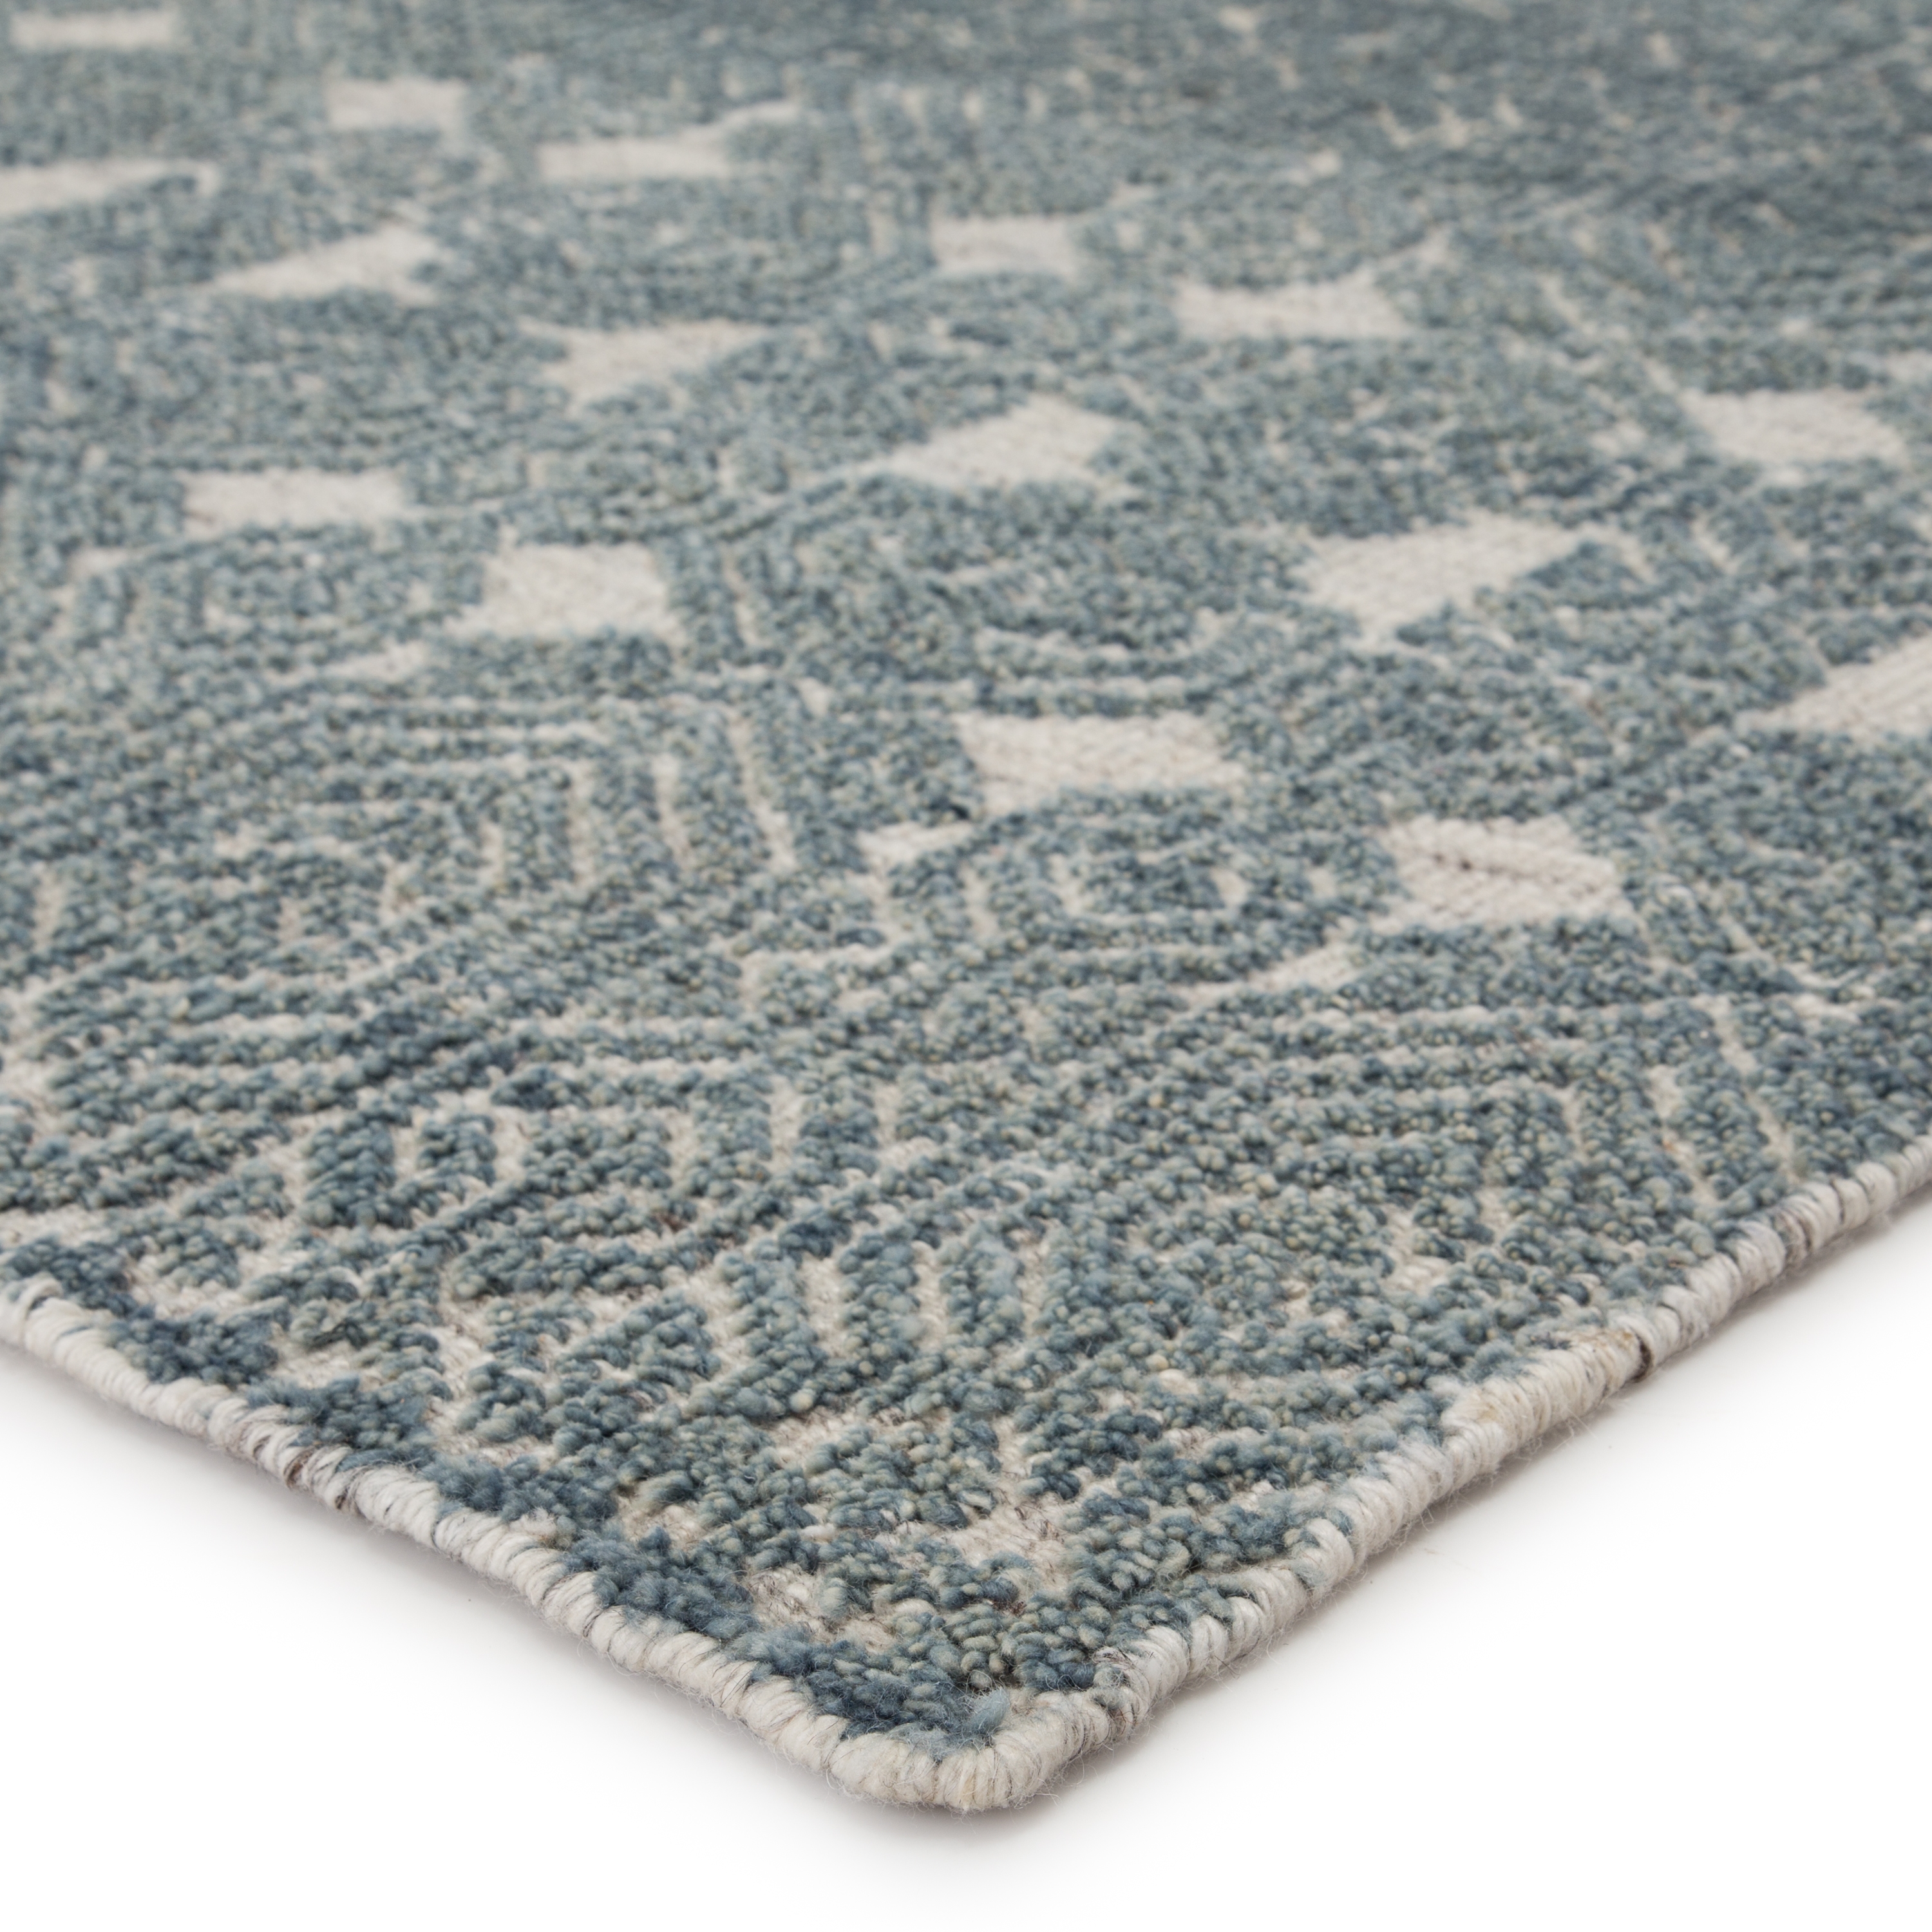 Abelle Hand-Knotted Medallion Teal/ Light Gray Area Rug (8'X11') - Image 1